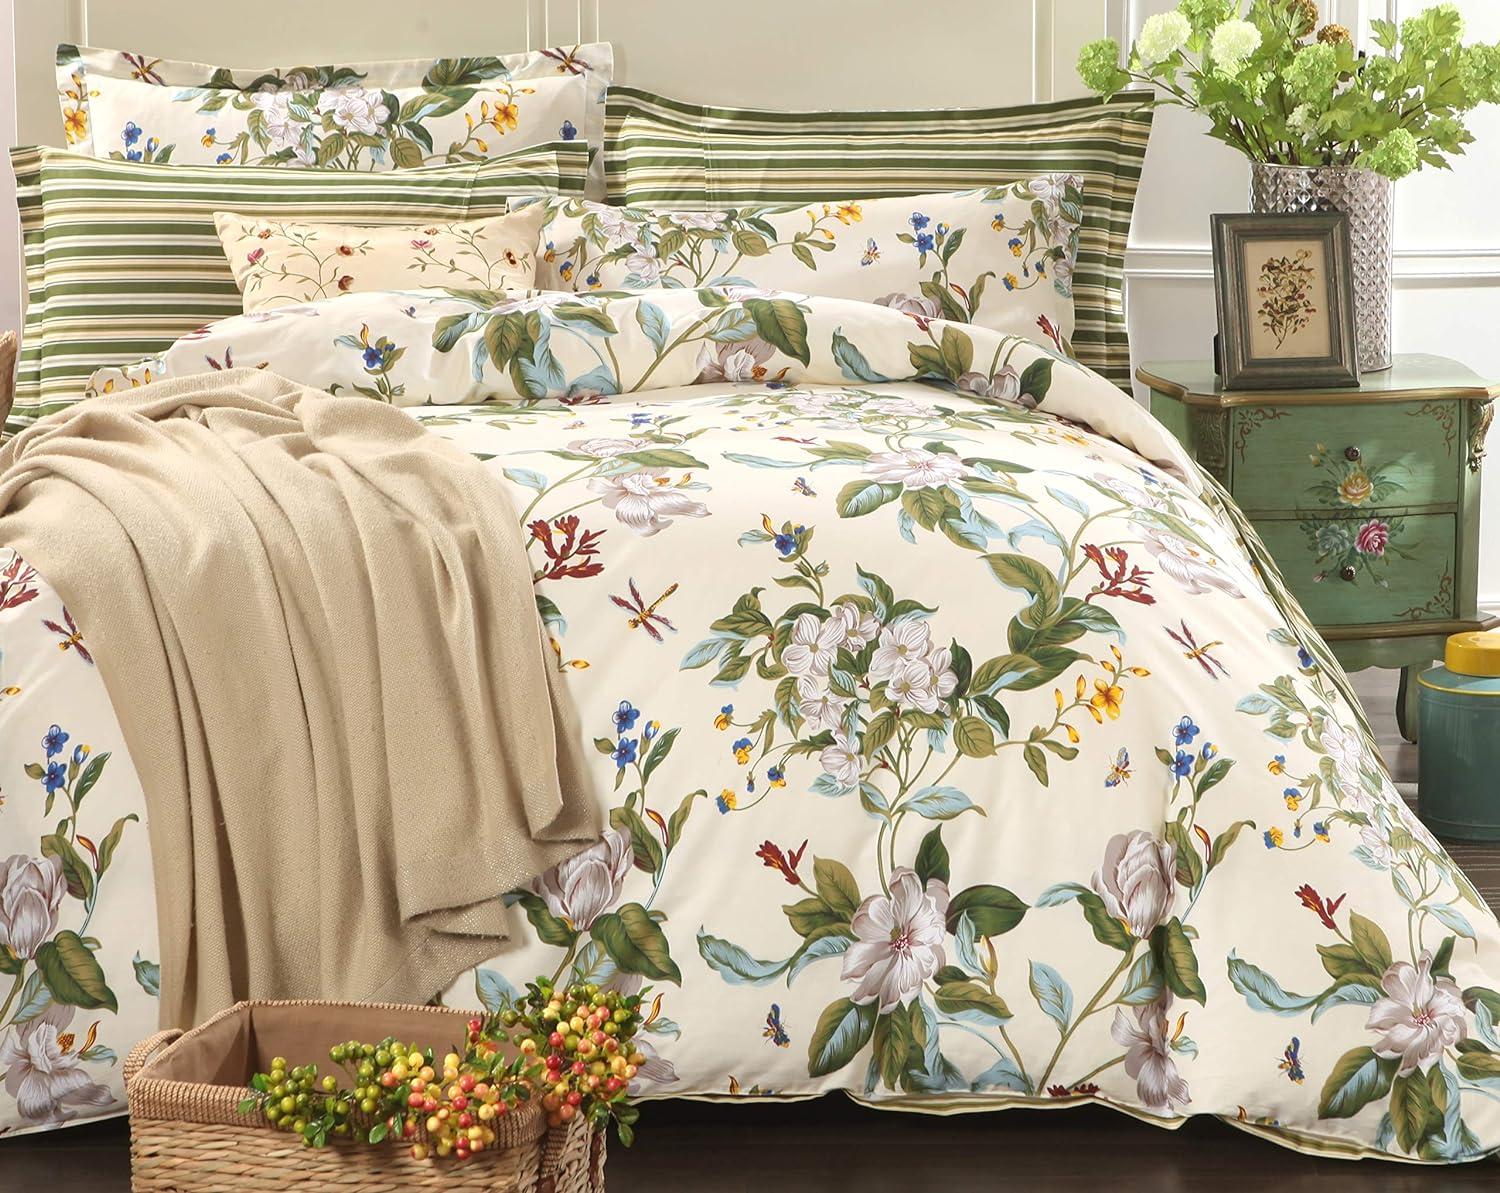 FADFAY Floral Duvet Cover Set 100% Cotton Green and Beige Striped Shabby Flower Bedding Branches Botanical Printed Reversible Zipper Comforter Cover & 2 PillowcasesTwin